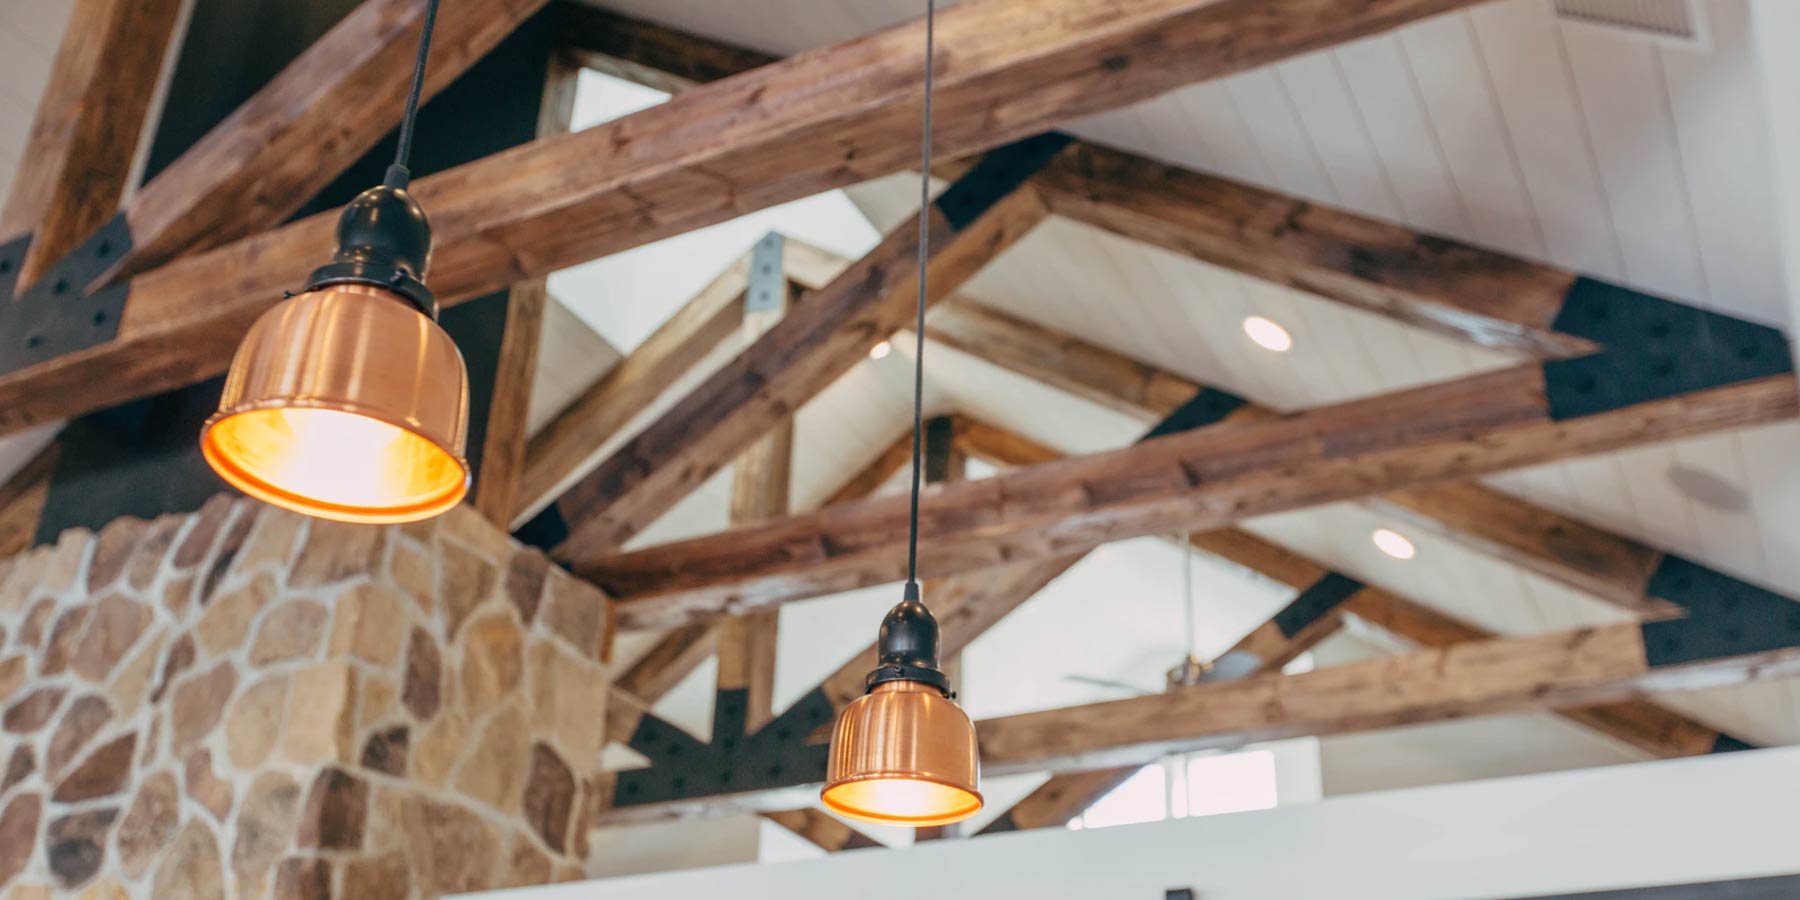 Ceiling wood beam  with two bronze hanging lamps.